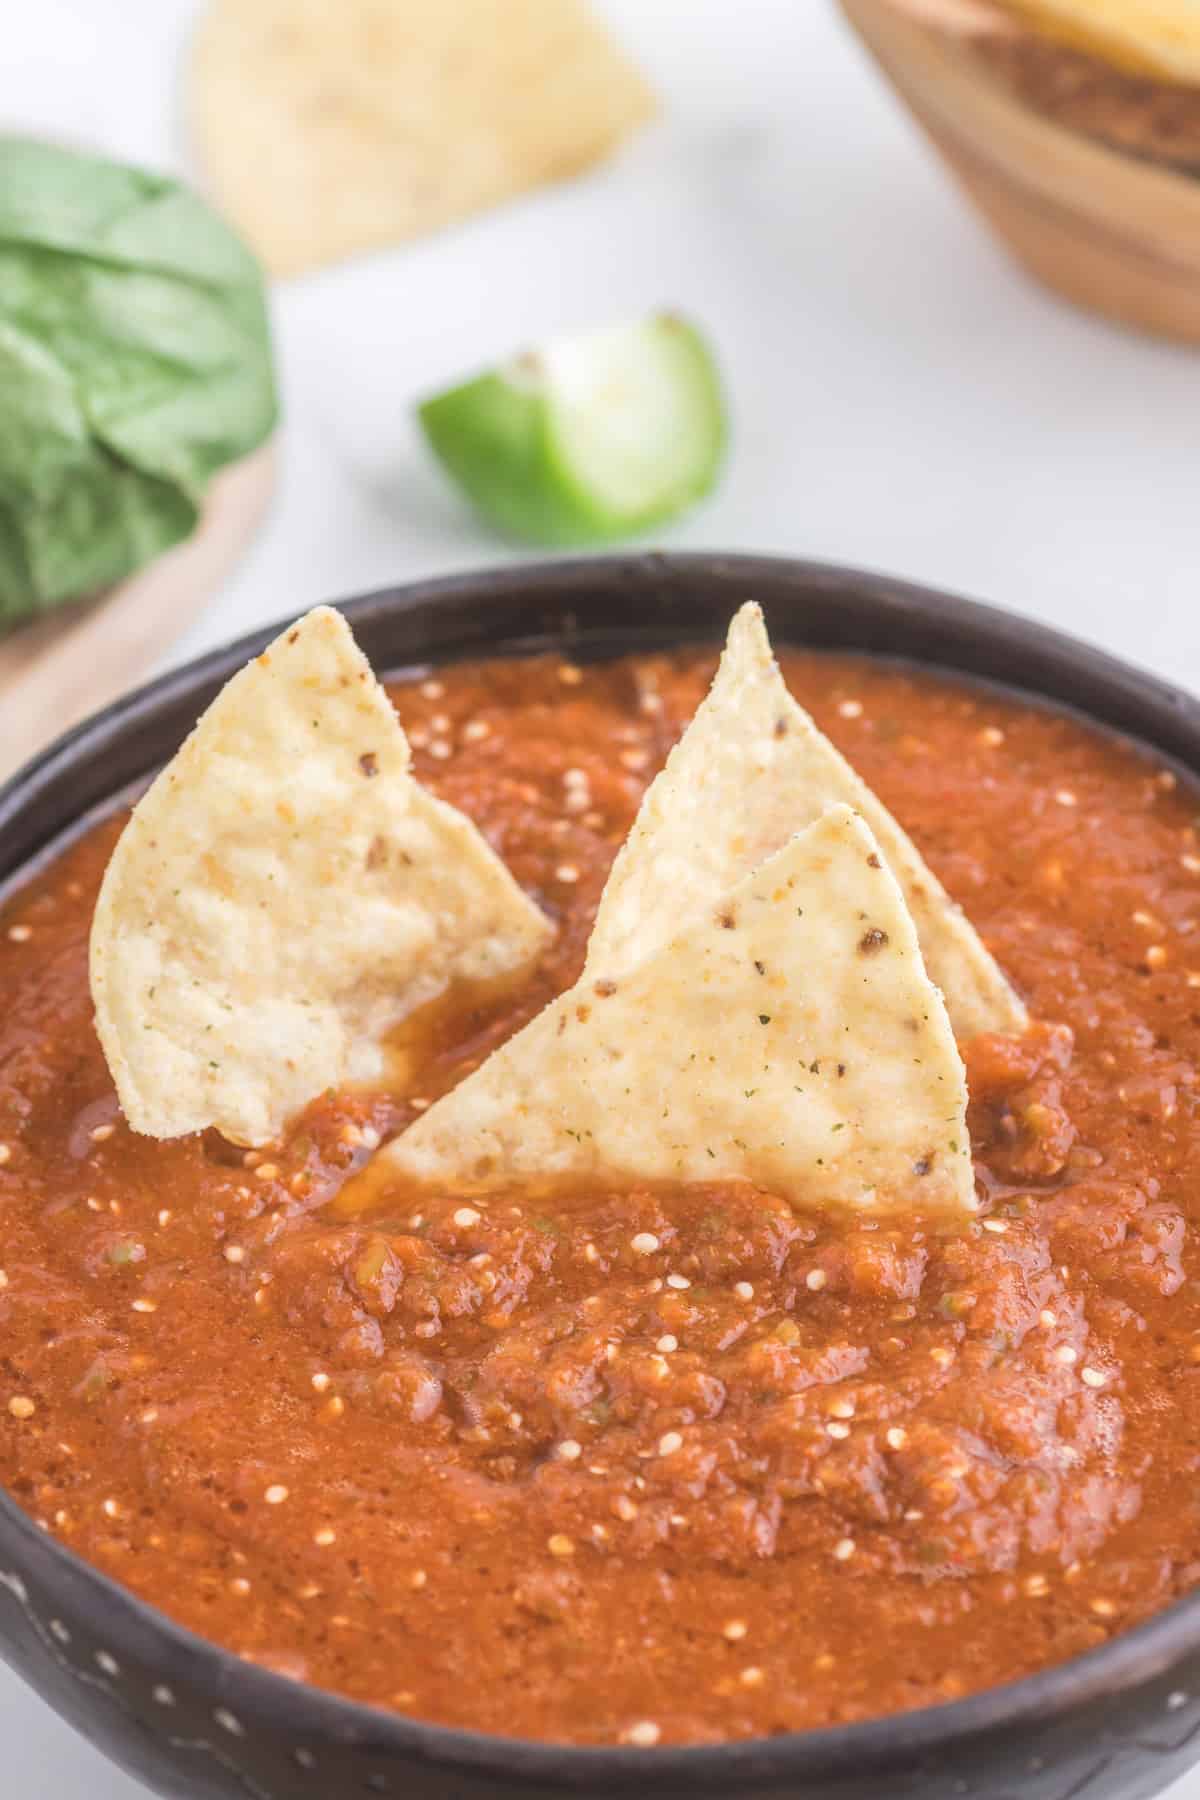 A bowl of Mexican salsa with tortilla chips, spiced with chipotle peppers.